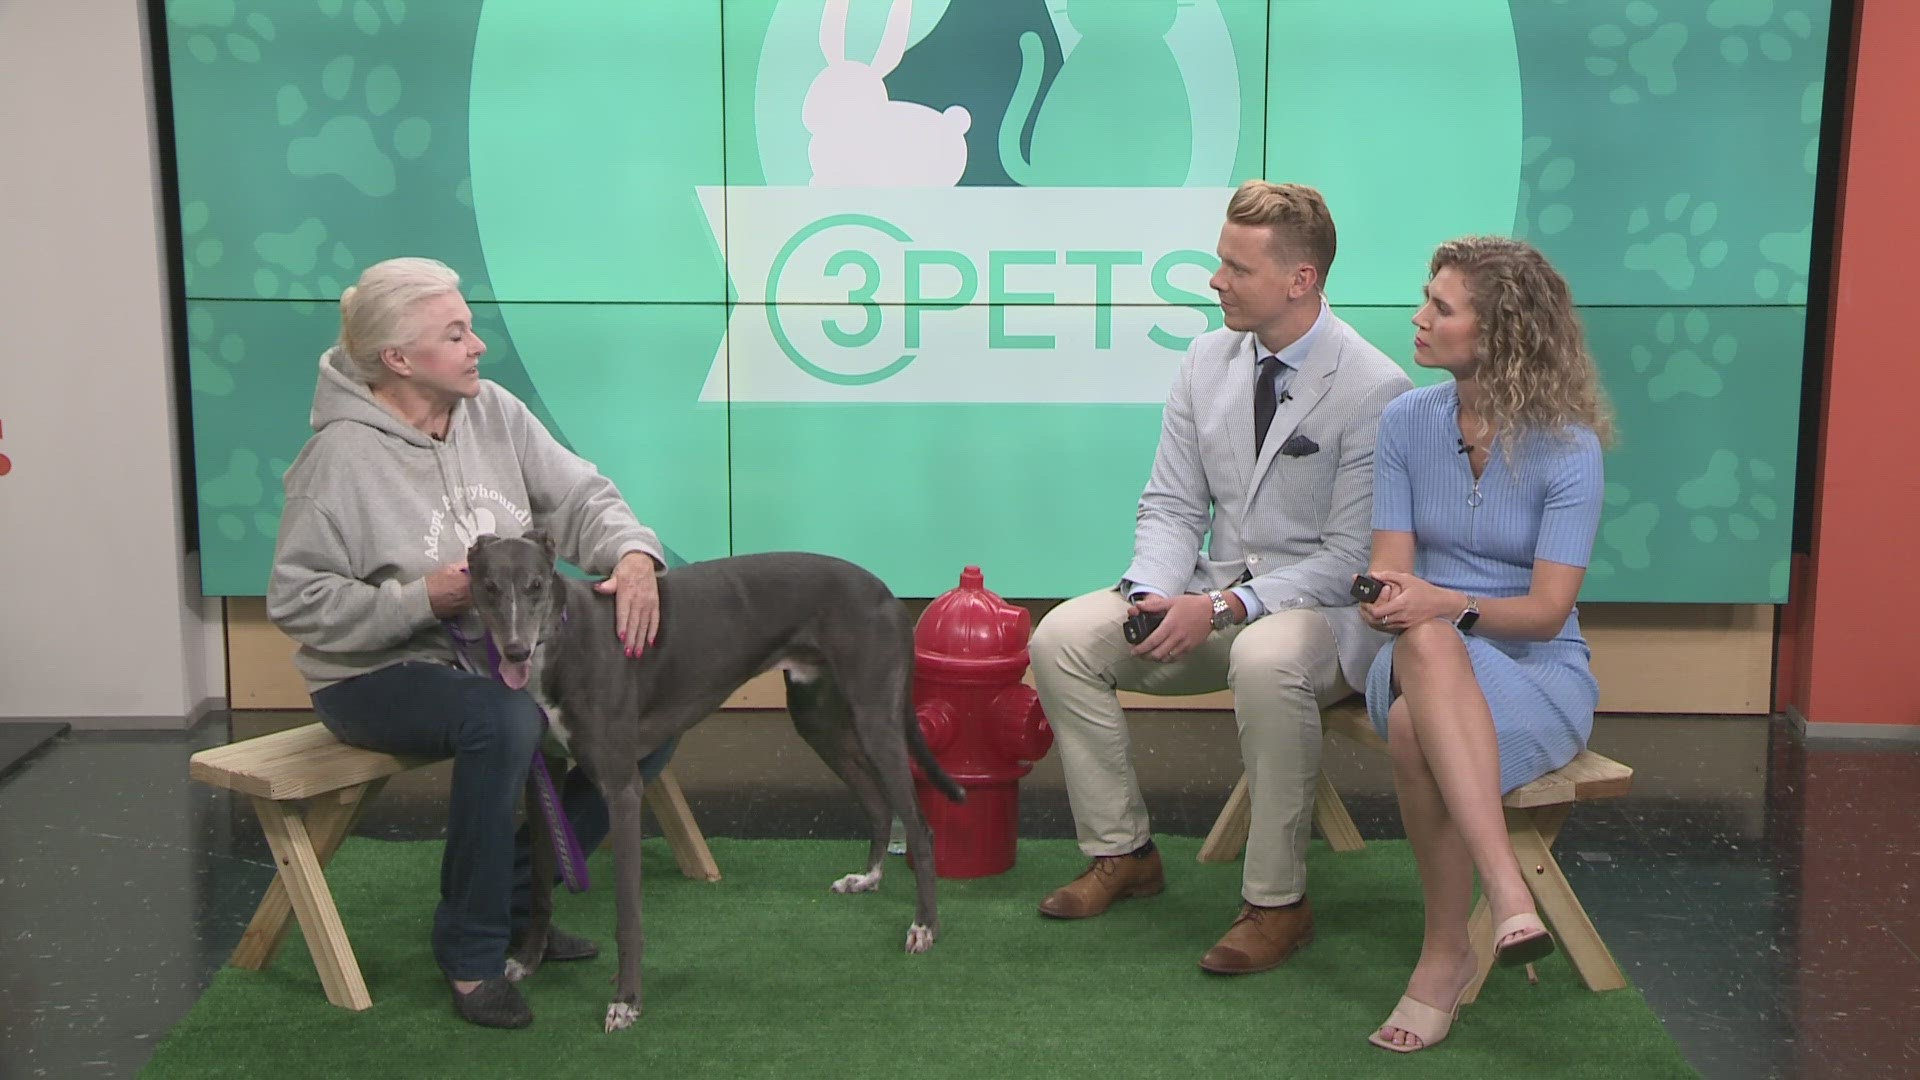 Greyhound Adoption of Ohio, located in Chagrin Falls, visited 3News with Lord who is up for adoption